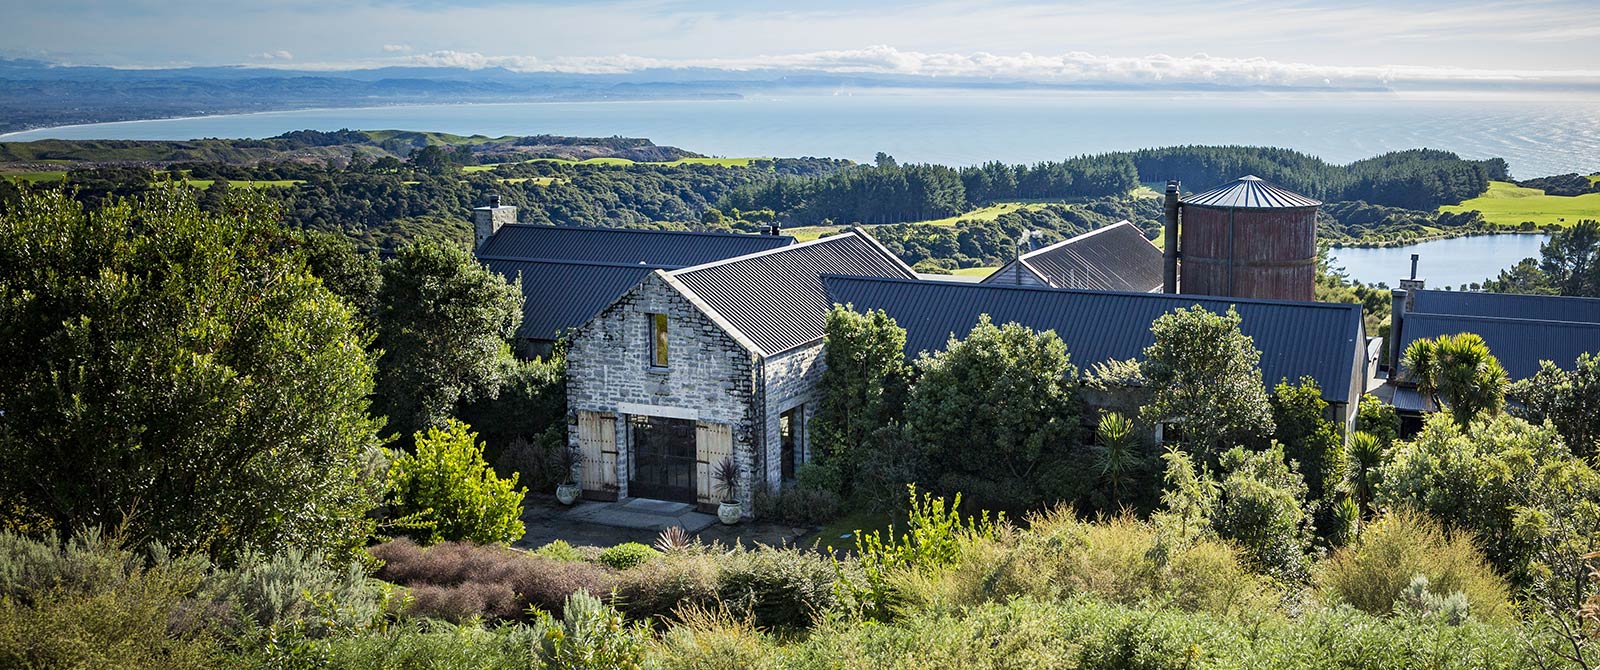 Cape Kidnappers - Golf Course and Luxury Lodge - Hawke's Bay New Zealand